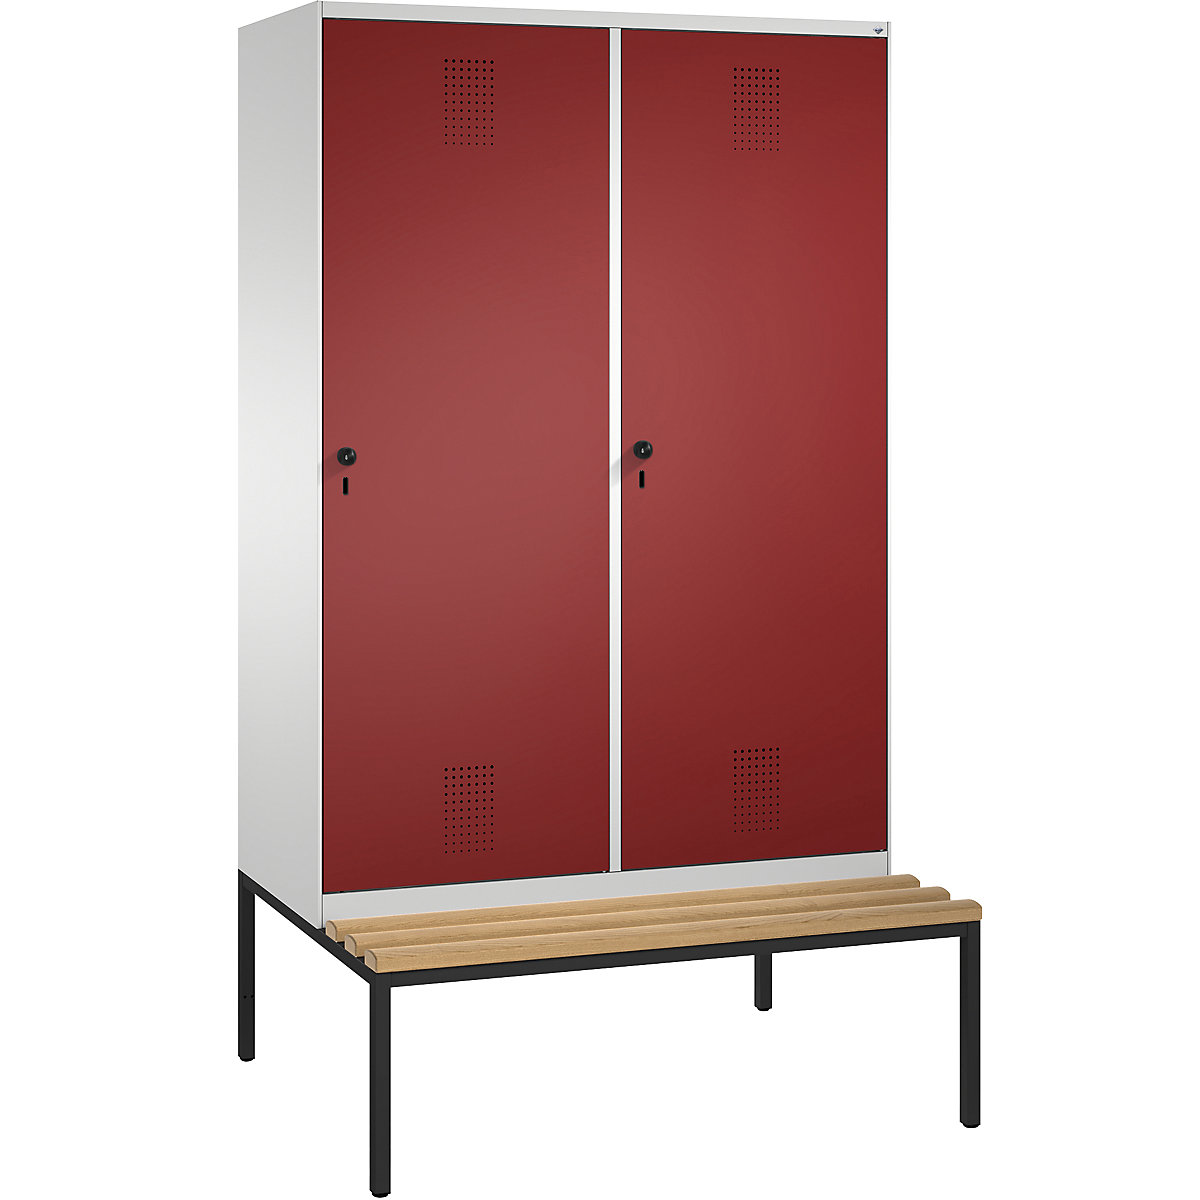 EVOLO cloakroom locker, with bench, door for 2 compartments – C+P, 4 compartments, 2 doors, compartment width 300 mm, light grey / ruby red-11